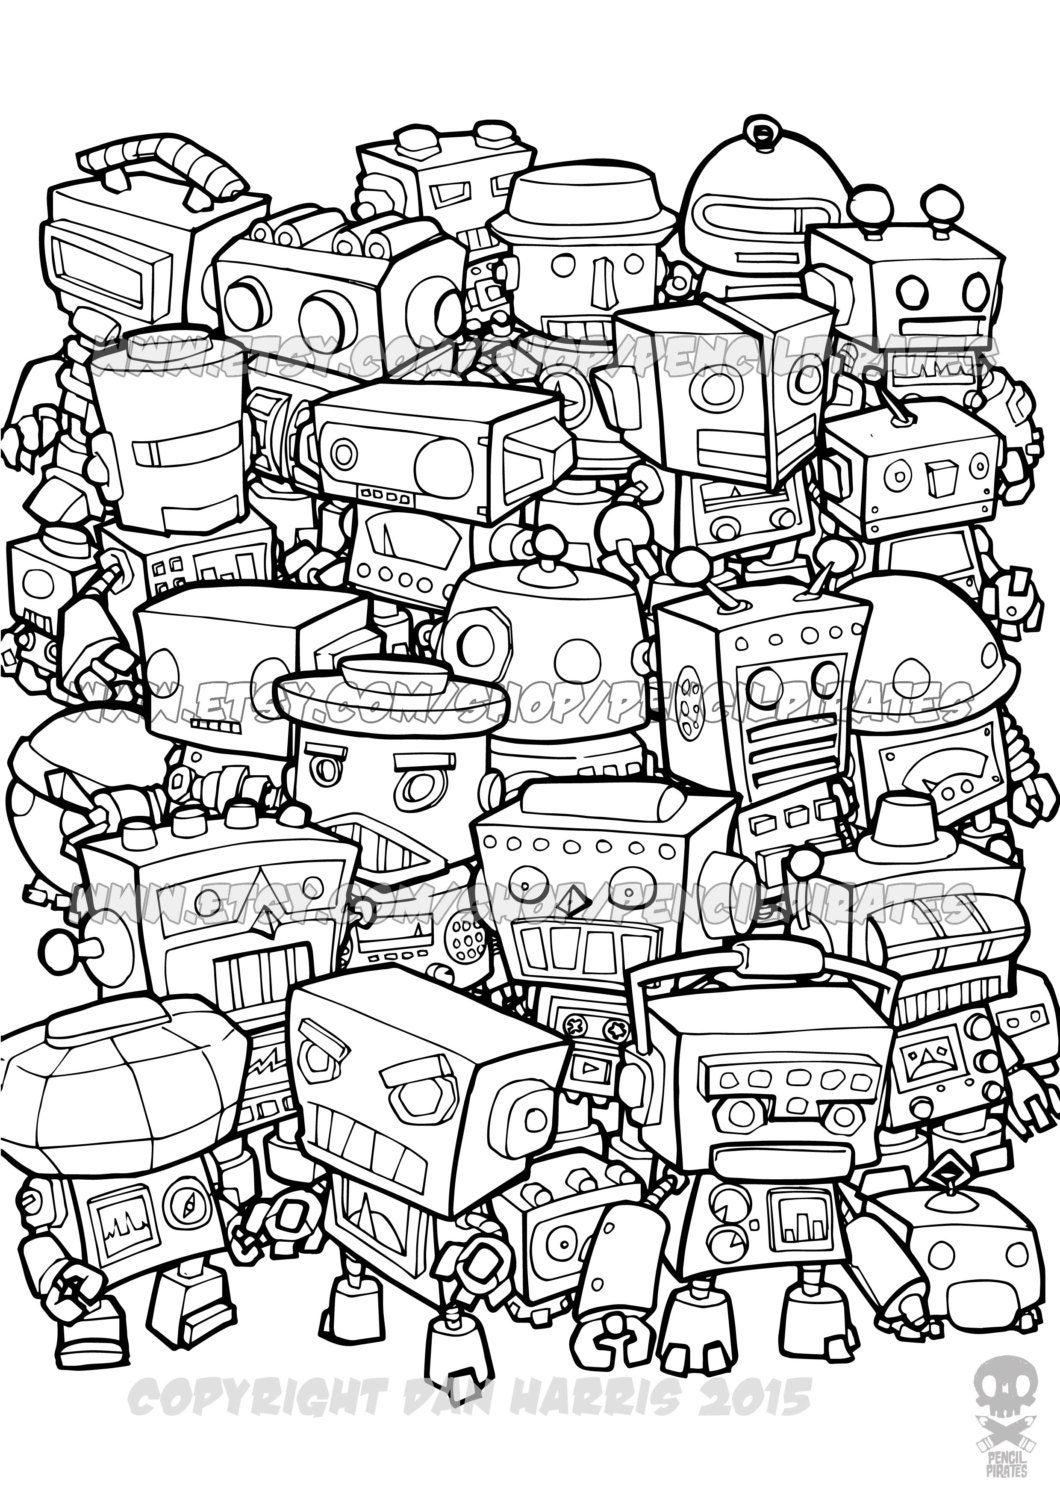 Download Retro Robot Colouring Page Adult colouring book page one ...